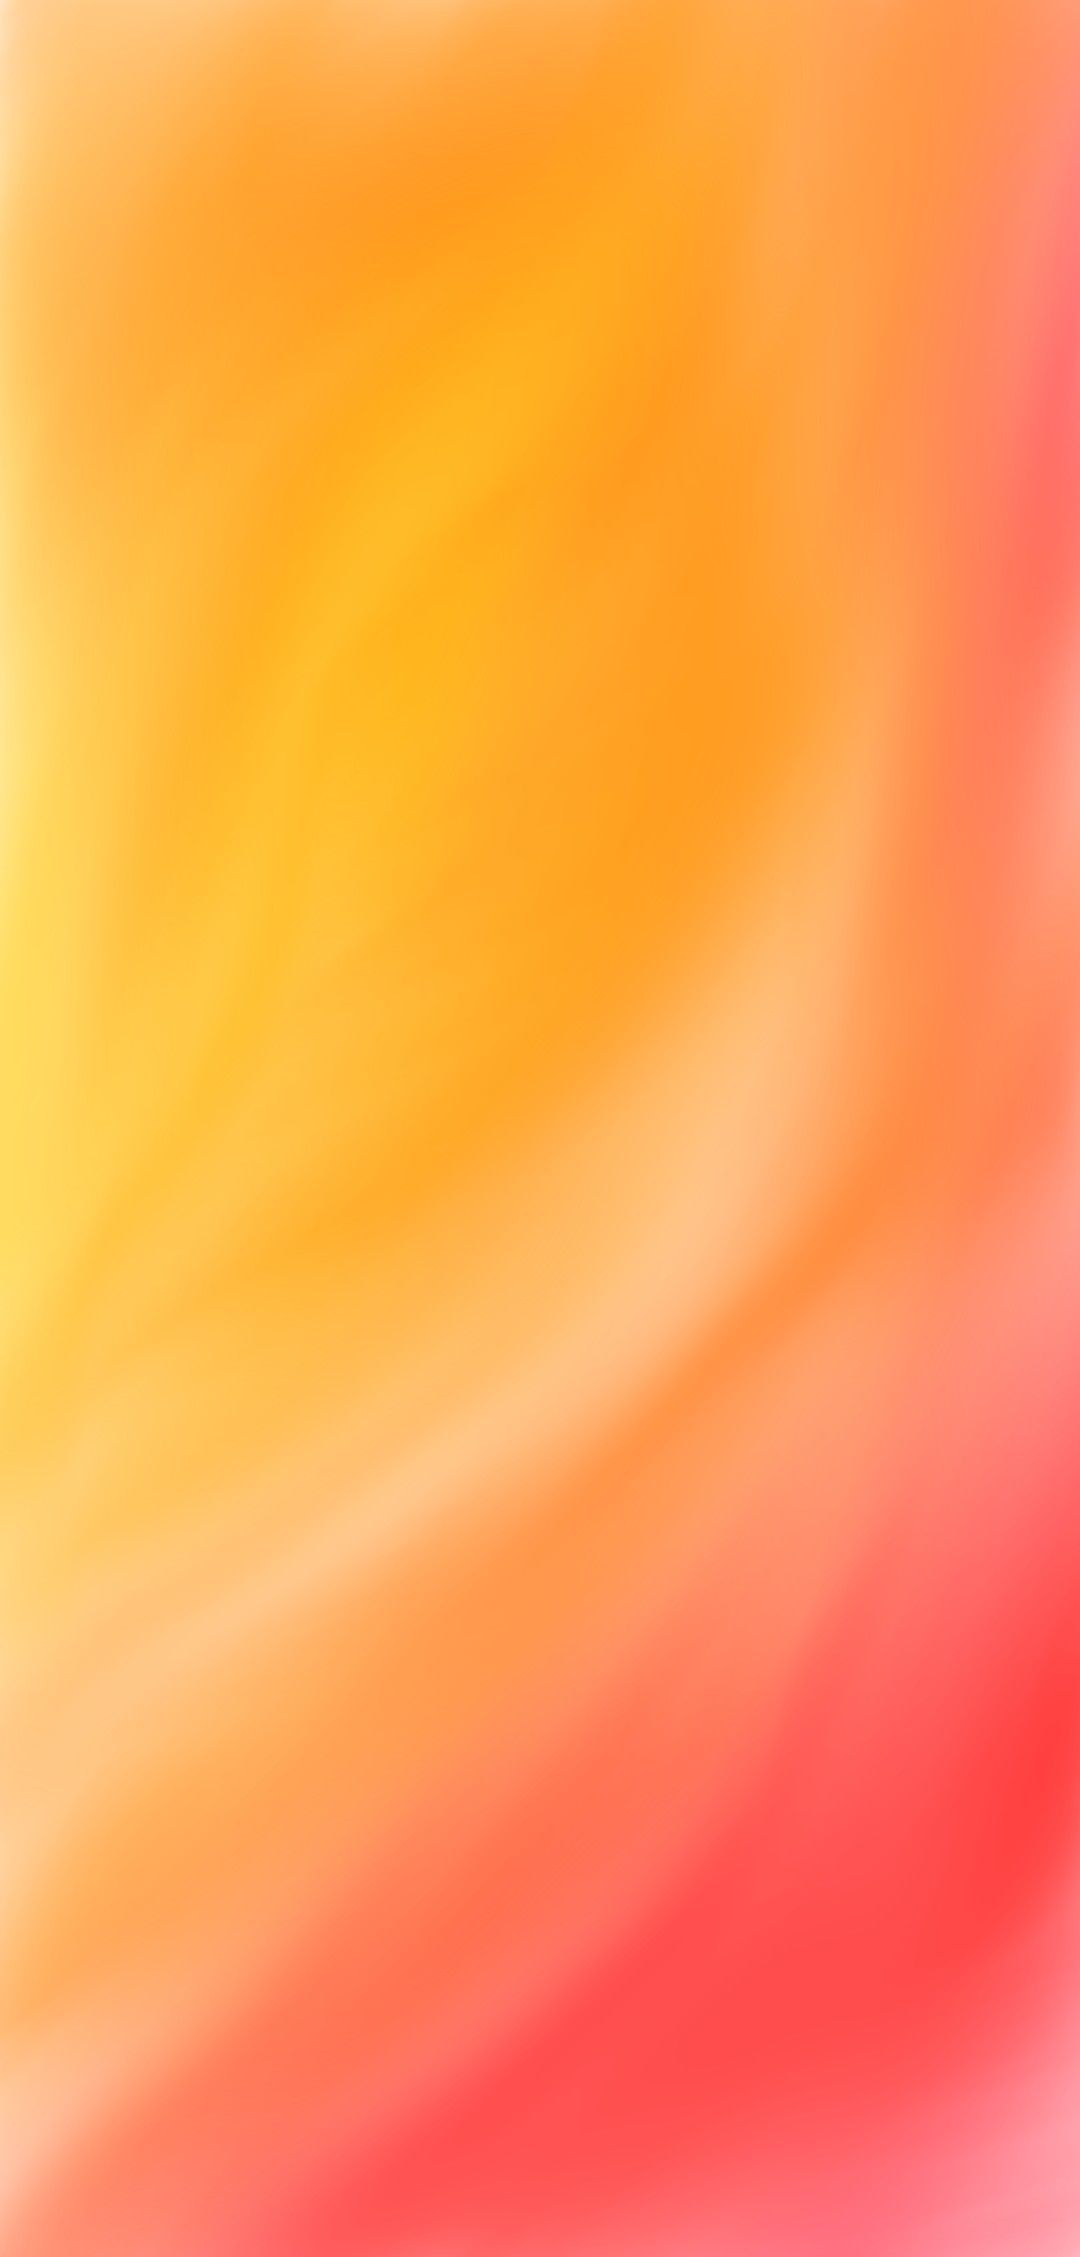 A colorful abstract wallpaper for iPhone with a soft color gradient. - Warm